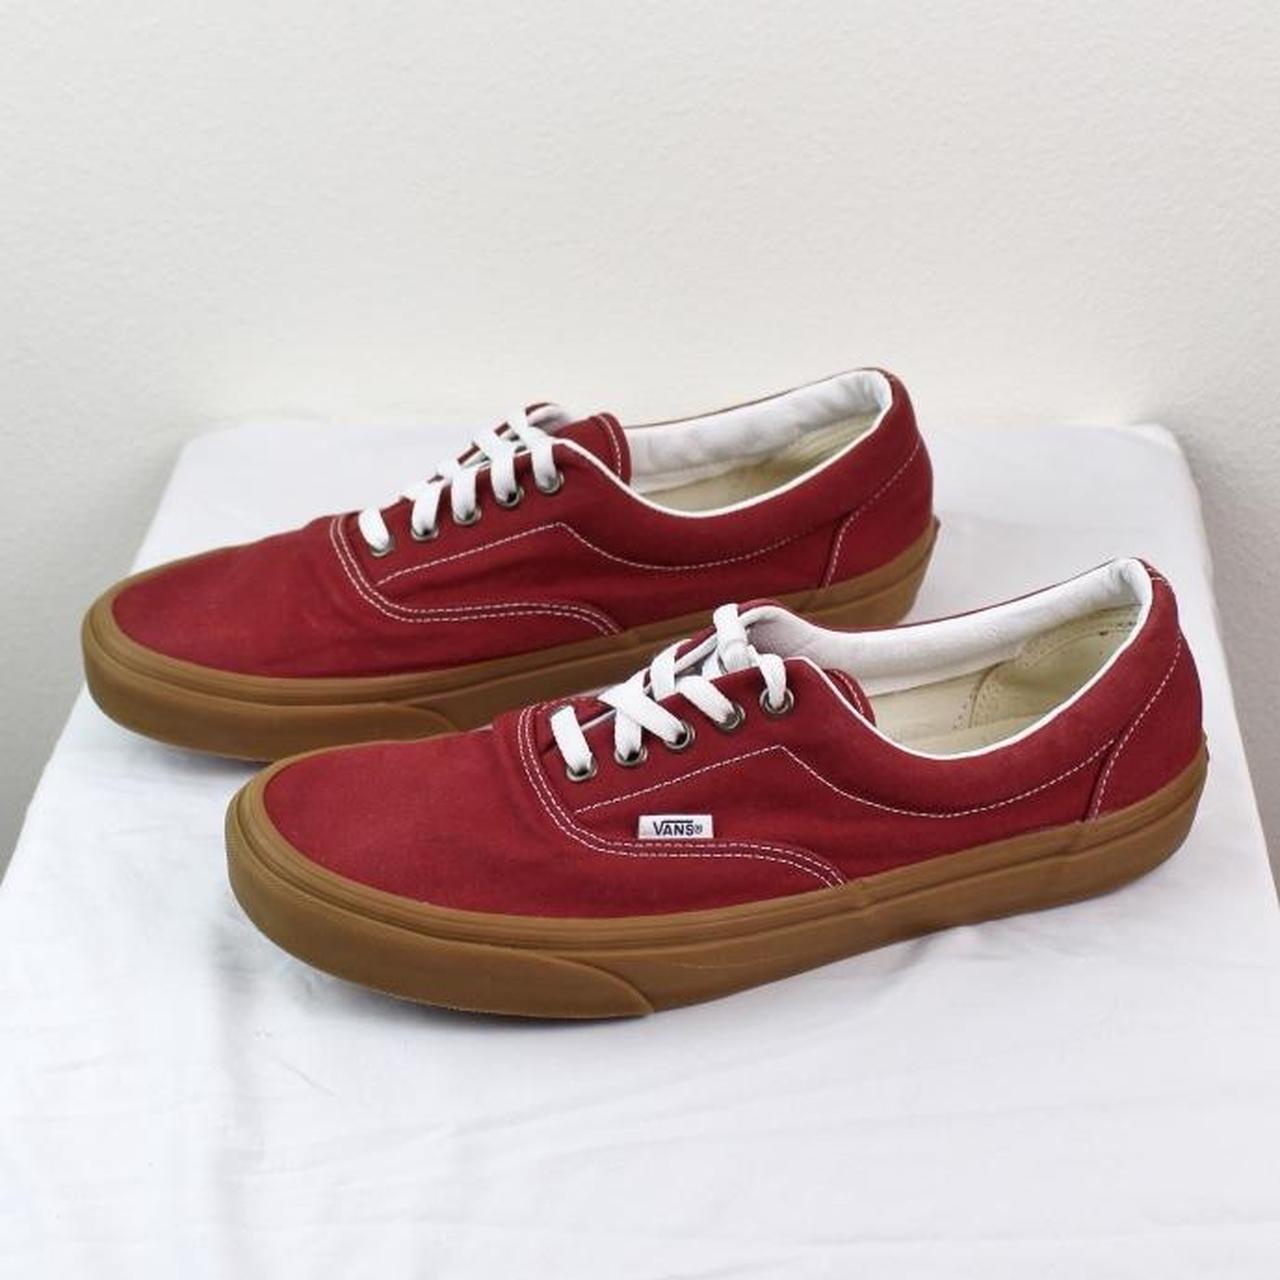 Classic Vans with Gum Sole in Rosewood Color... - Depop